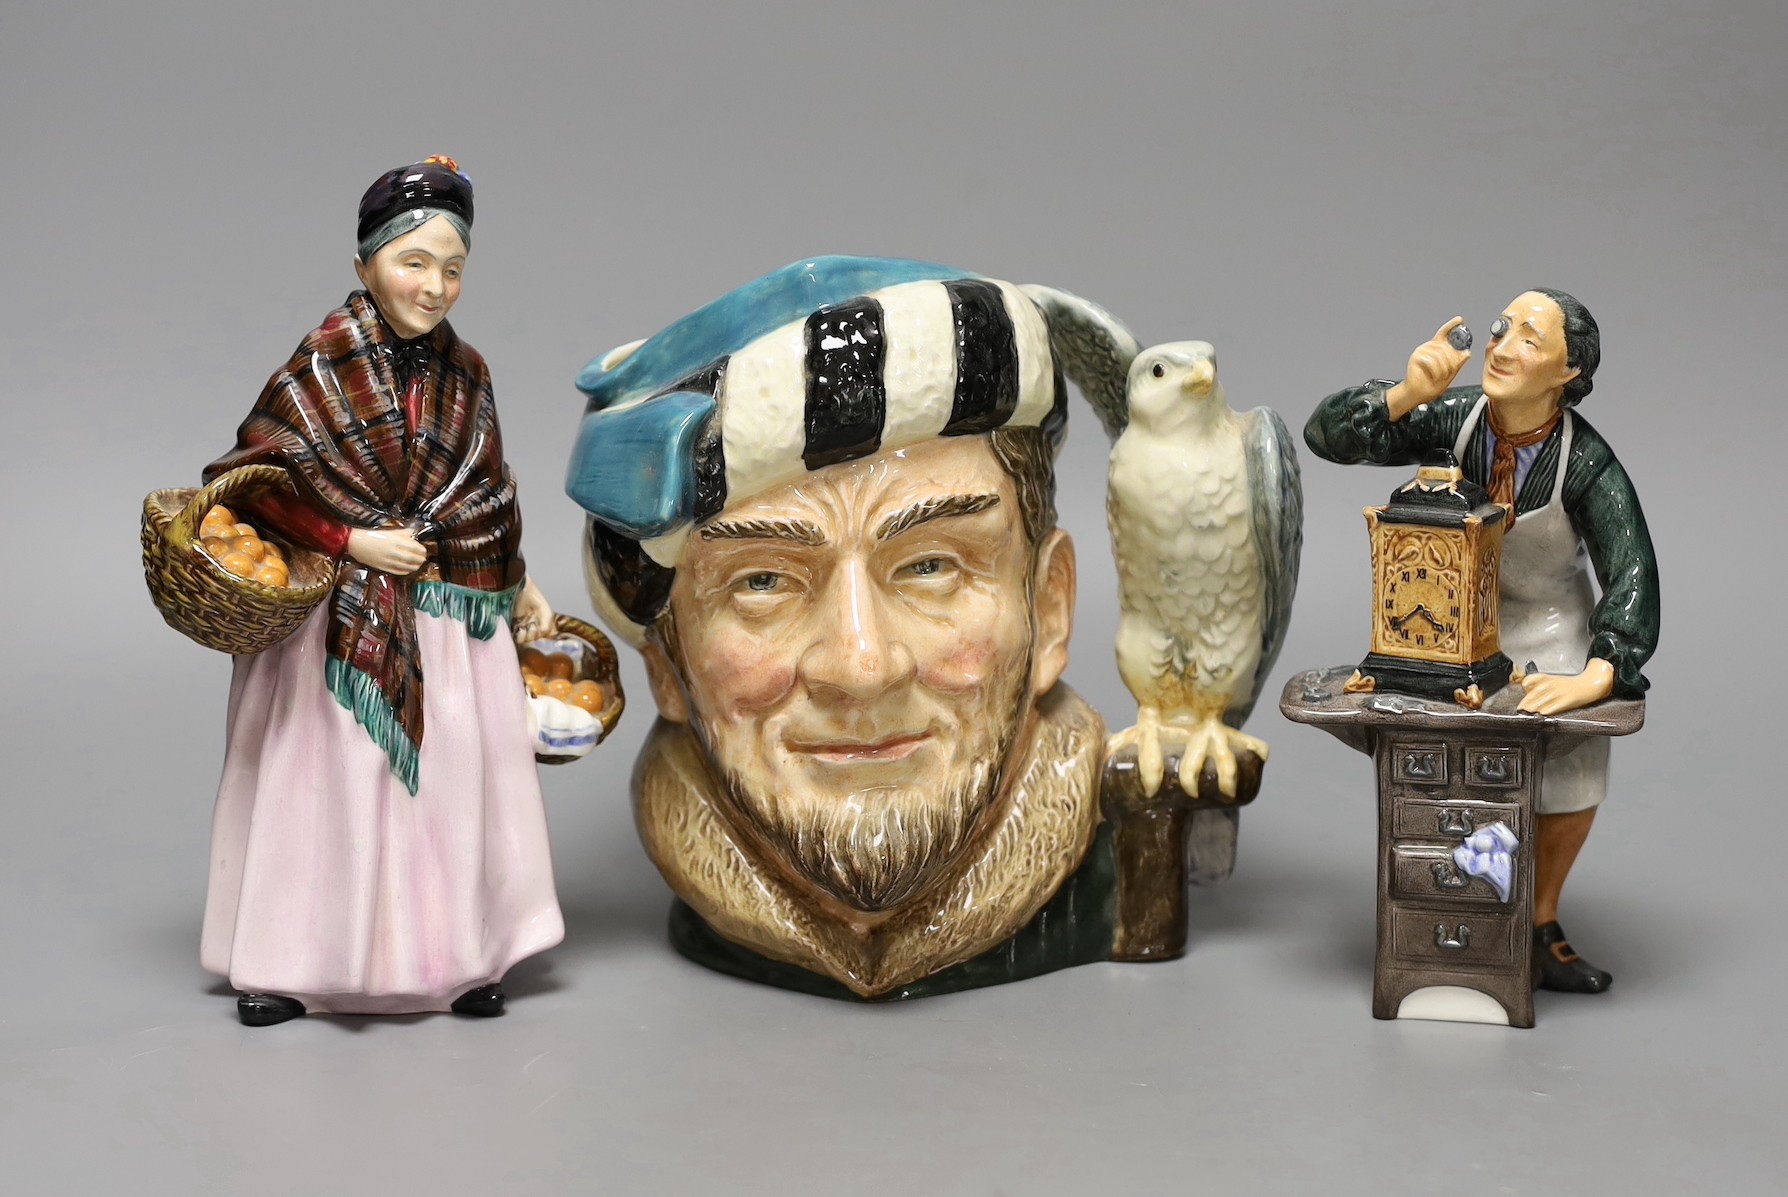 Two Royal Doulton figures, ‘The Clockmaker HN2279’ and ‘The Orange Lady HN1759’ together with a character jug ‘The Falconer D6533’